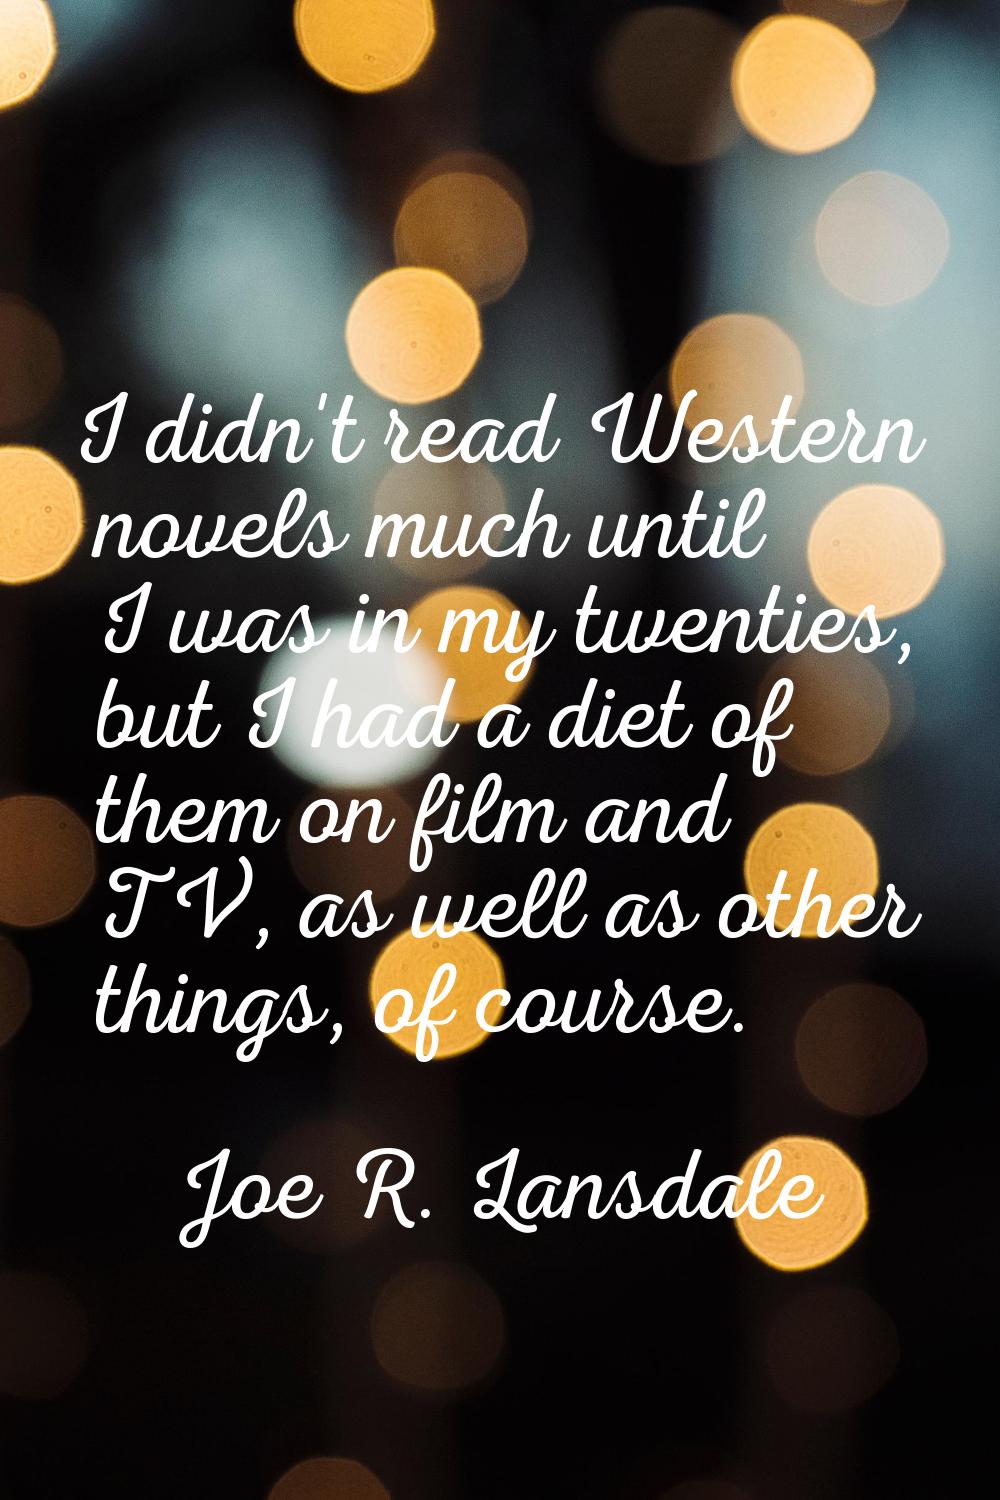 I didn't read Western novels much until I was in my twenties, but I had a diet of them on film and 